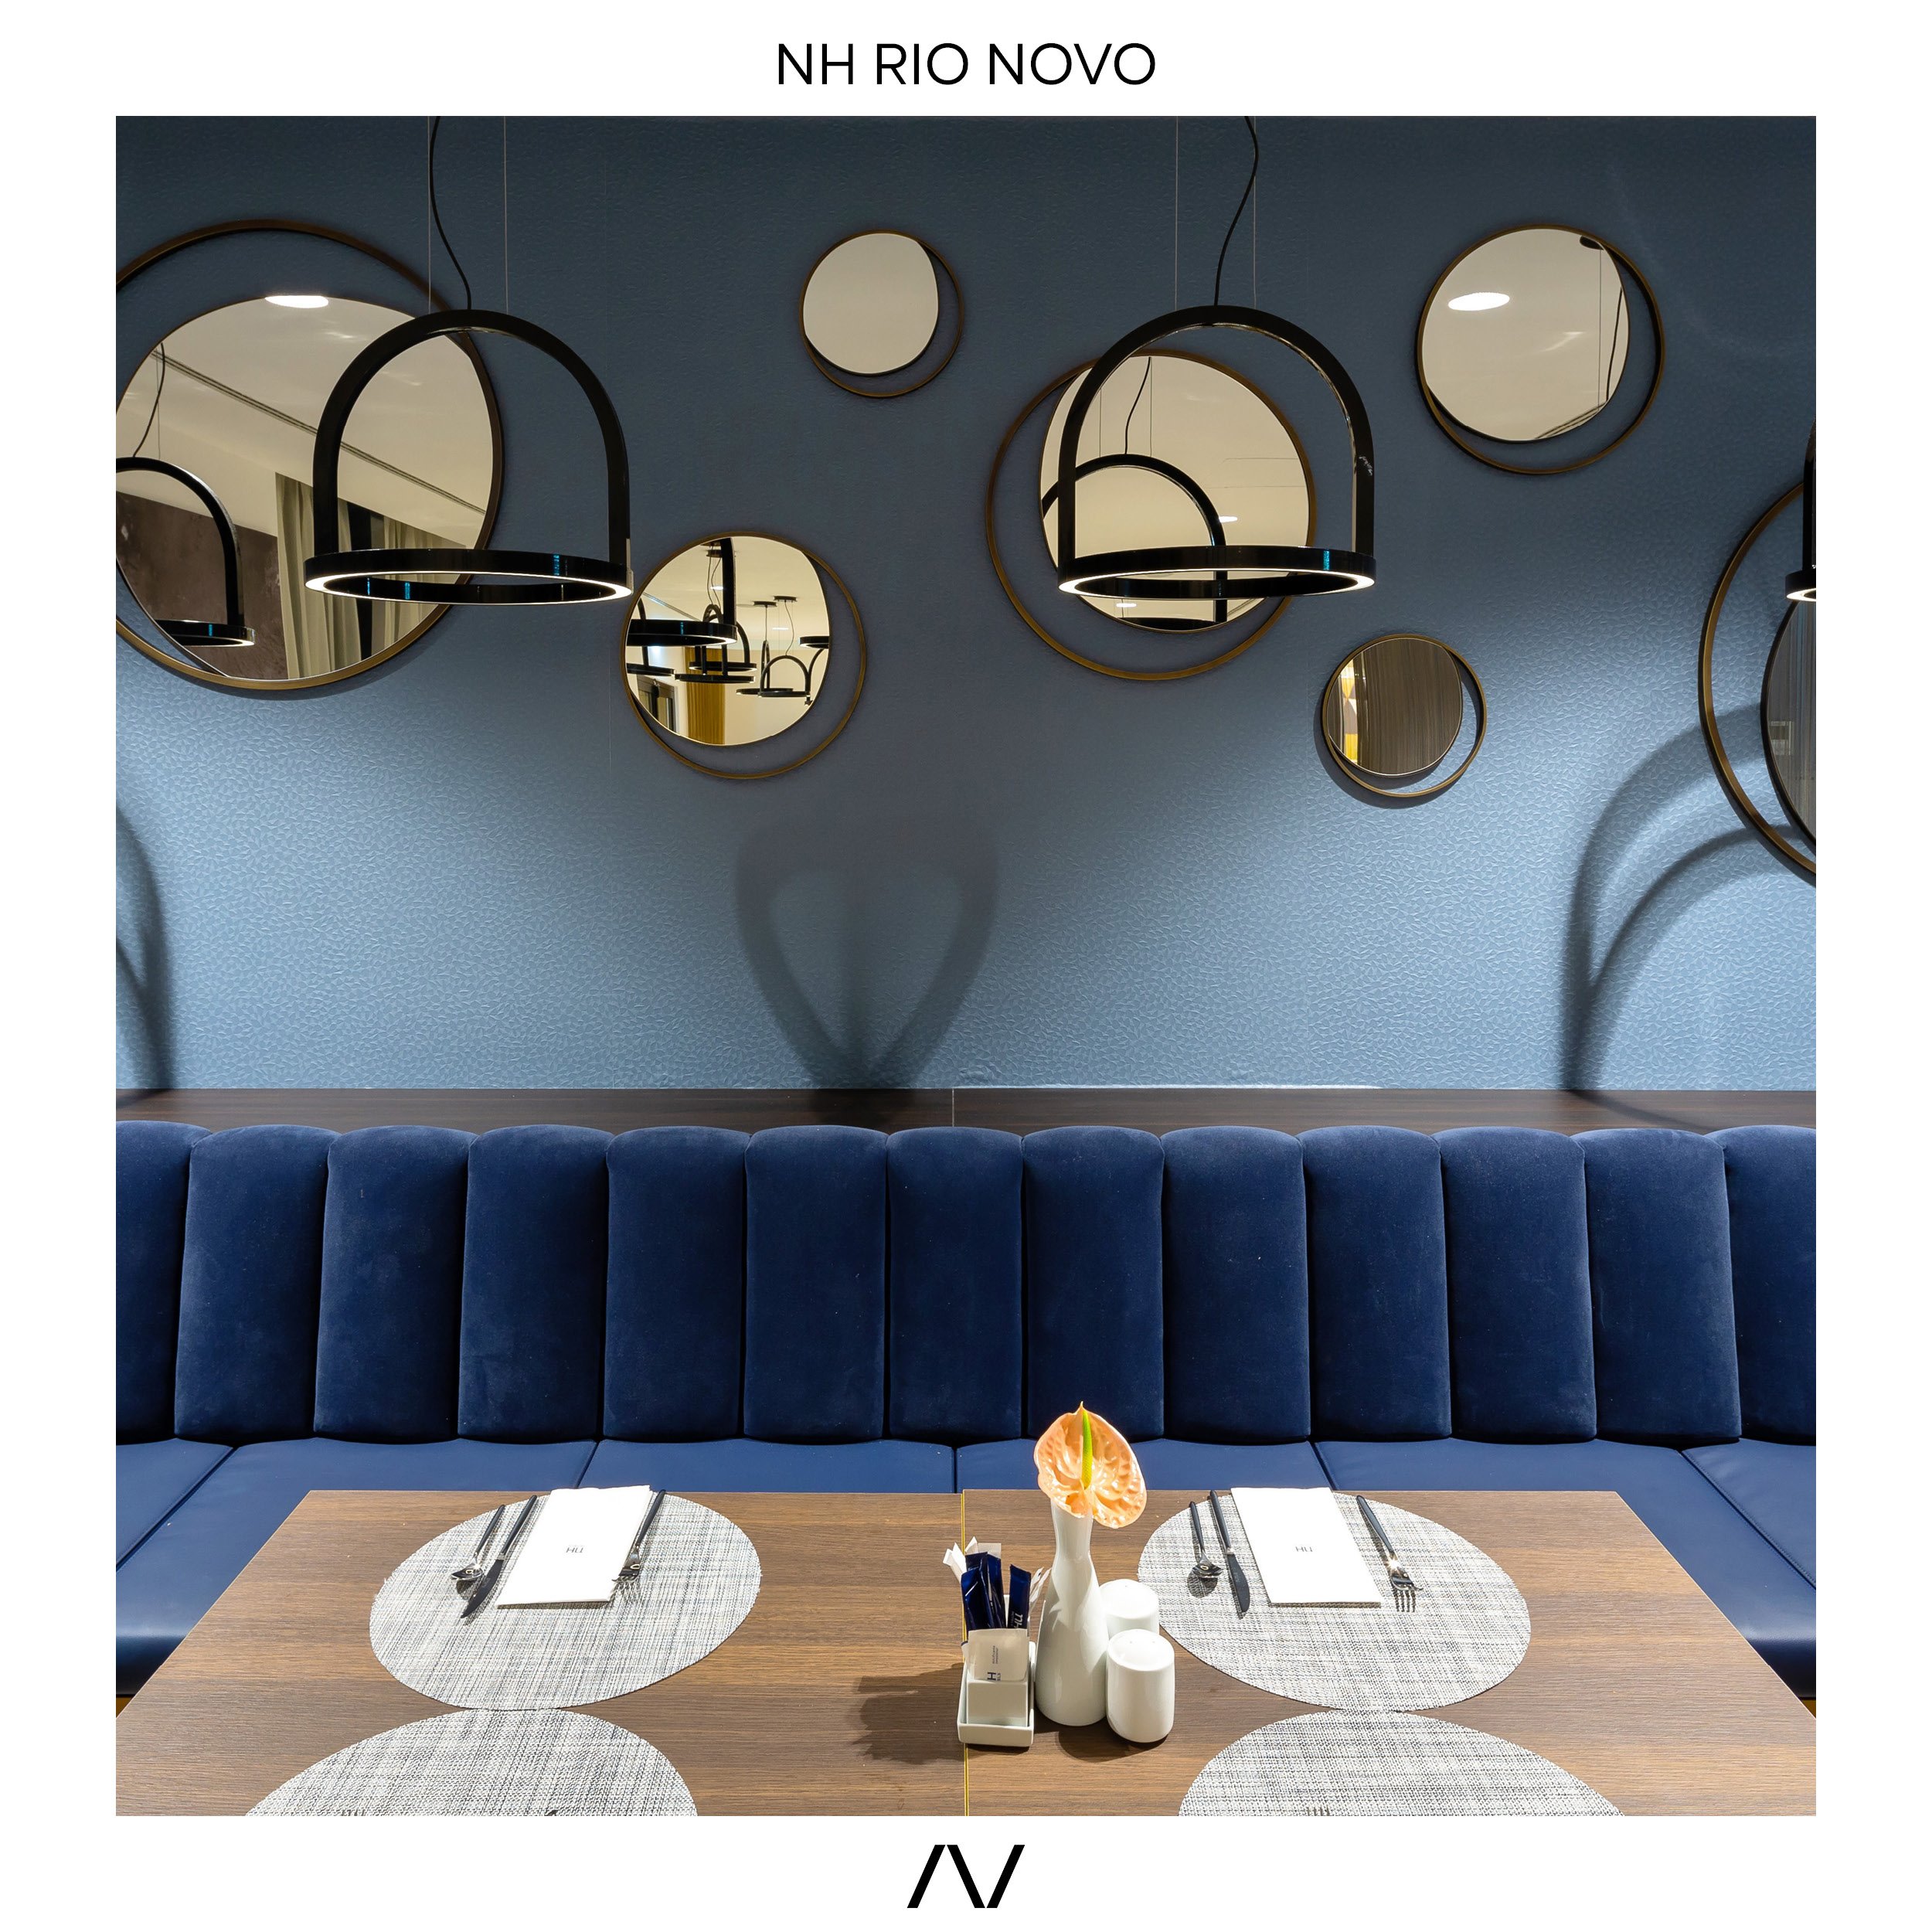 Nh Rio Novo is the renovation of a partially abandoned building